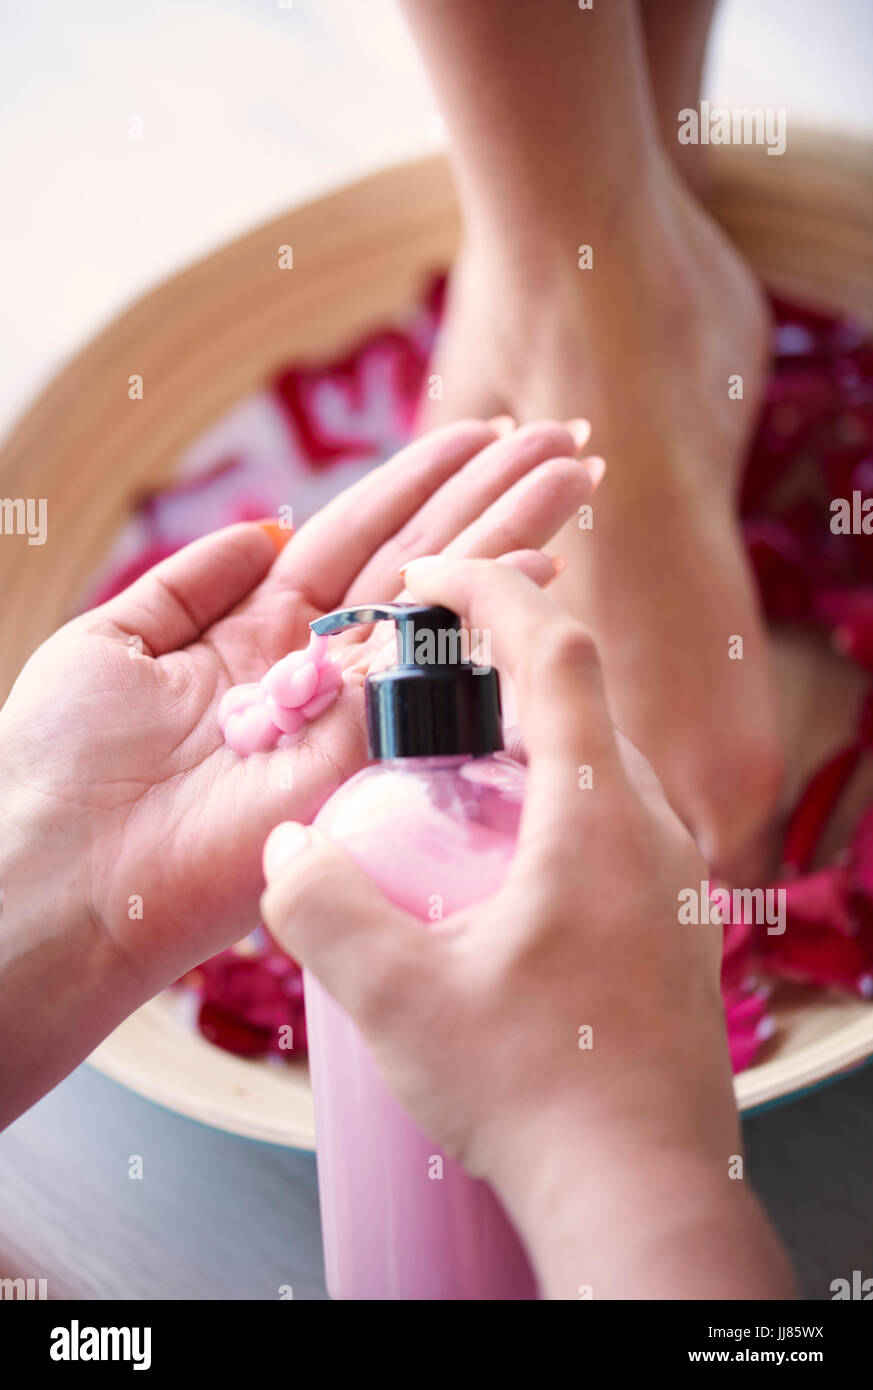 Woman's feet in bowl with water and petal Stock Photo